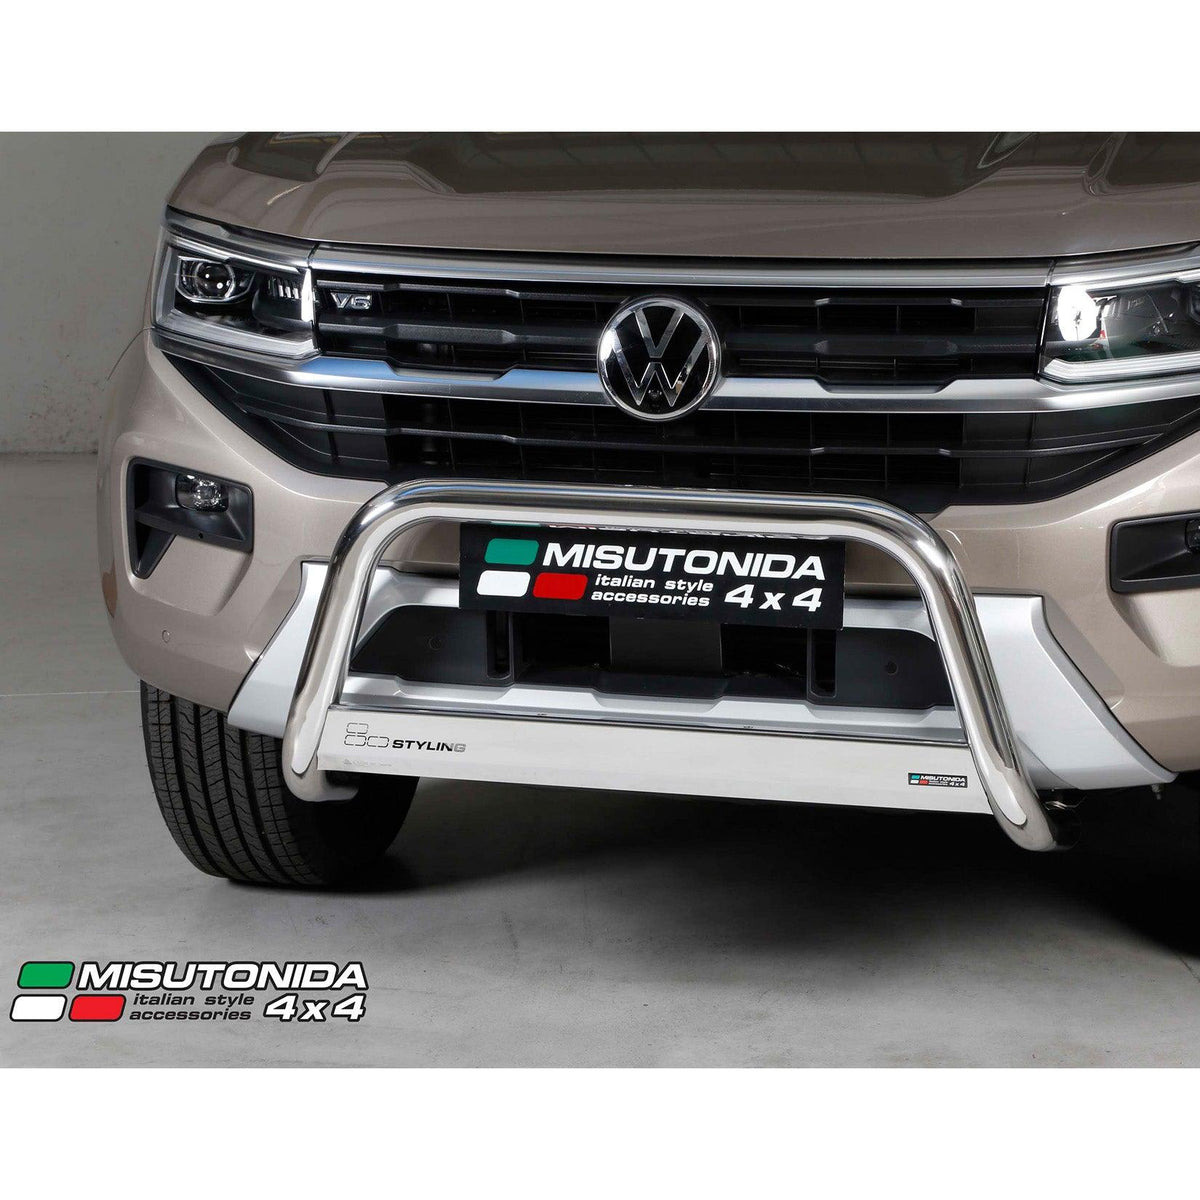 VW AMAROK 2023 ON MISUTONIDA EU APPROVED STAINLESS STEEL FRONT BAR – 63MM - Storm Xccessories